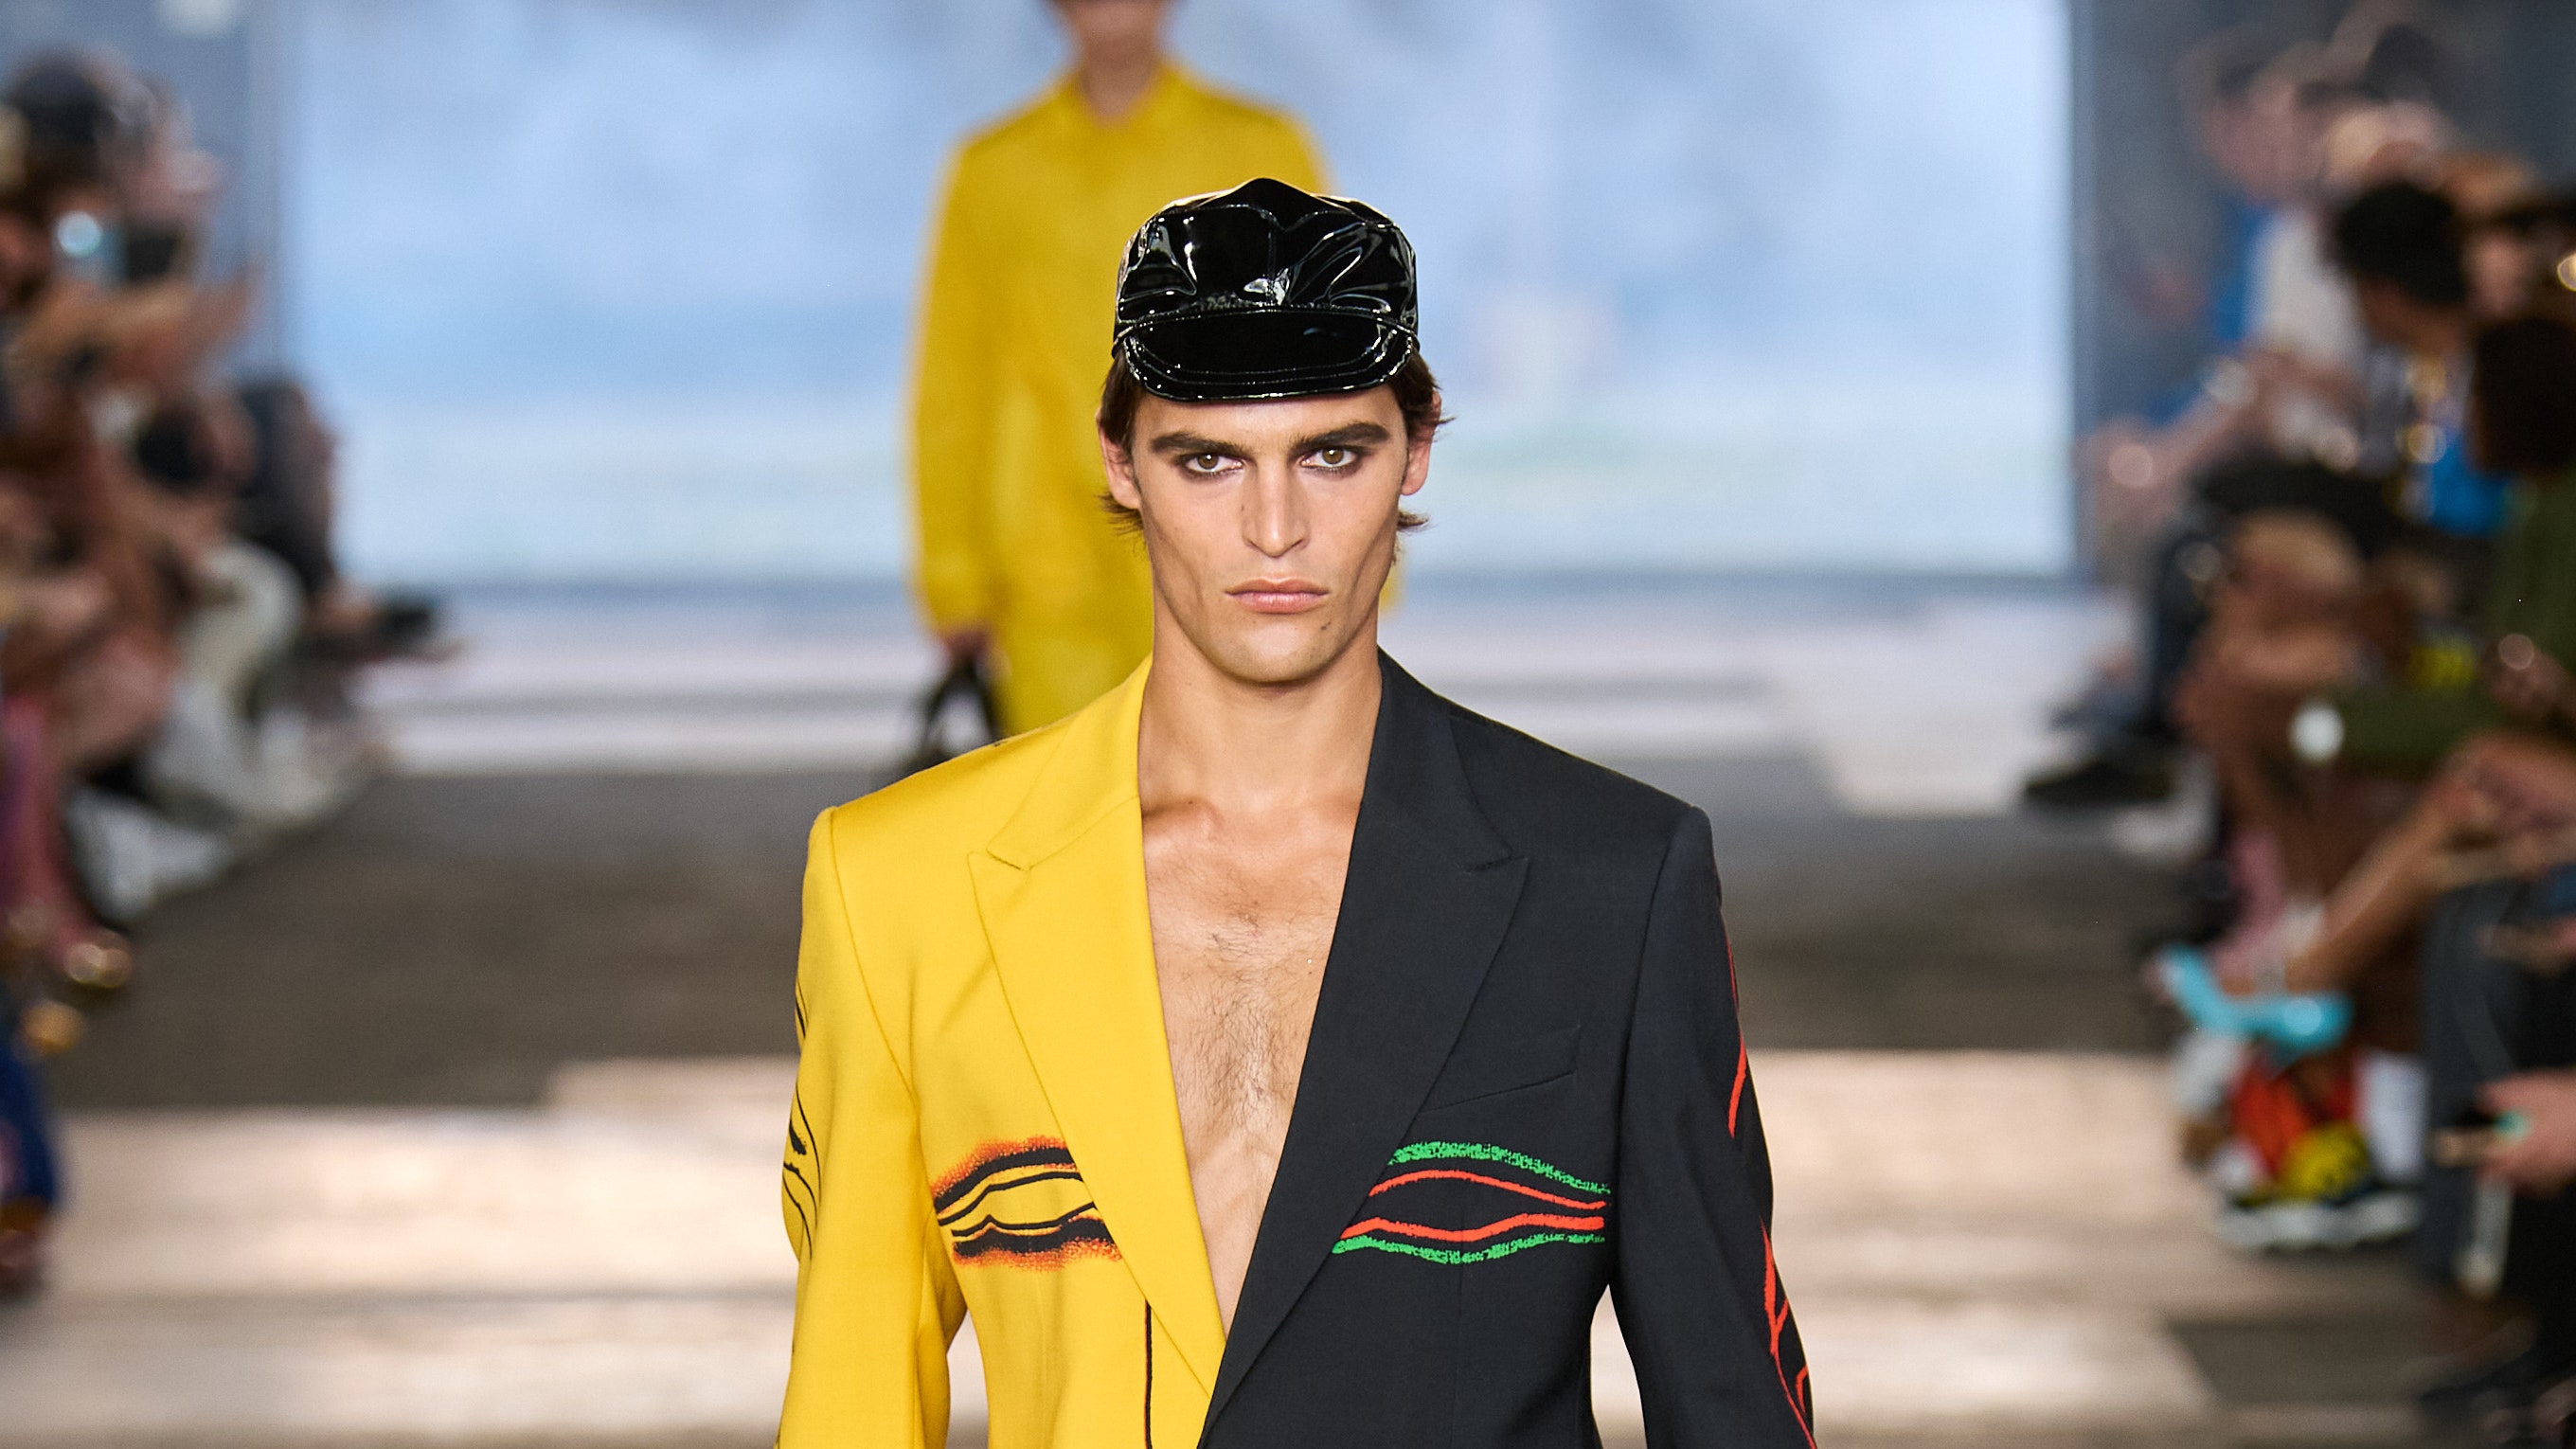 Moschino spring summer men's collection 2023 punk-militaristic inspiration challenges all gender norms